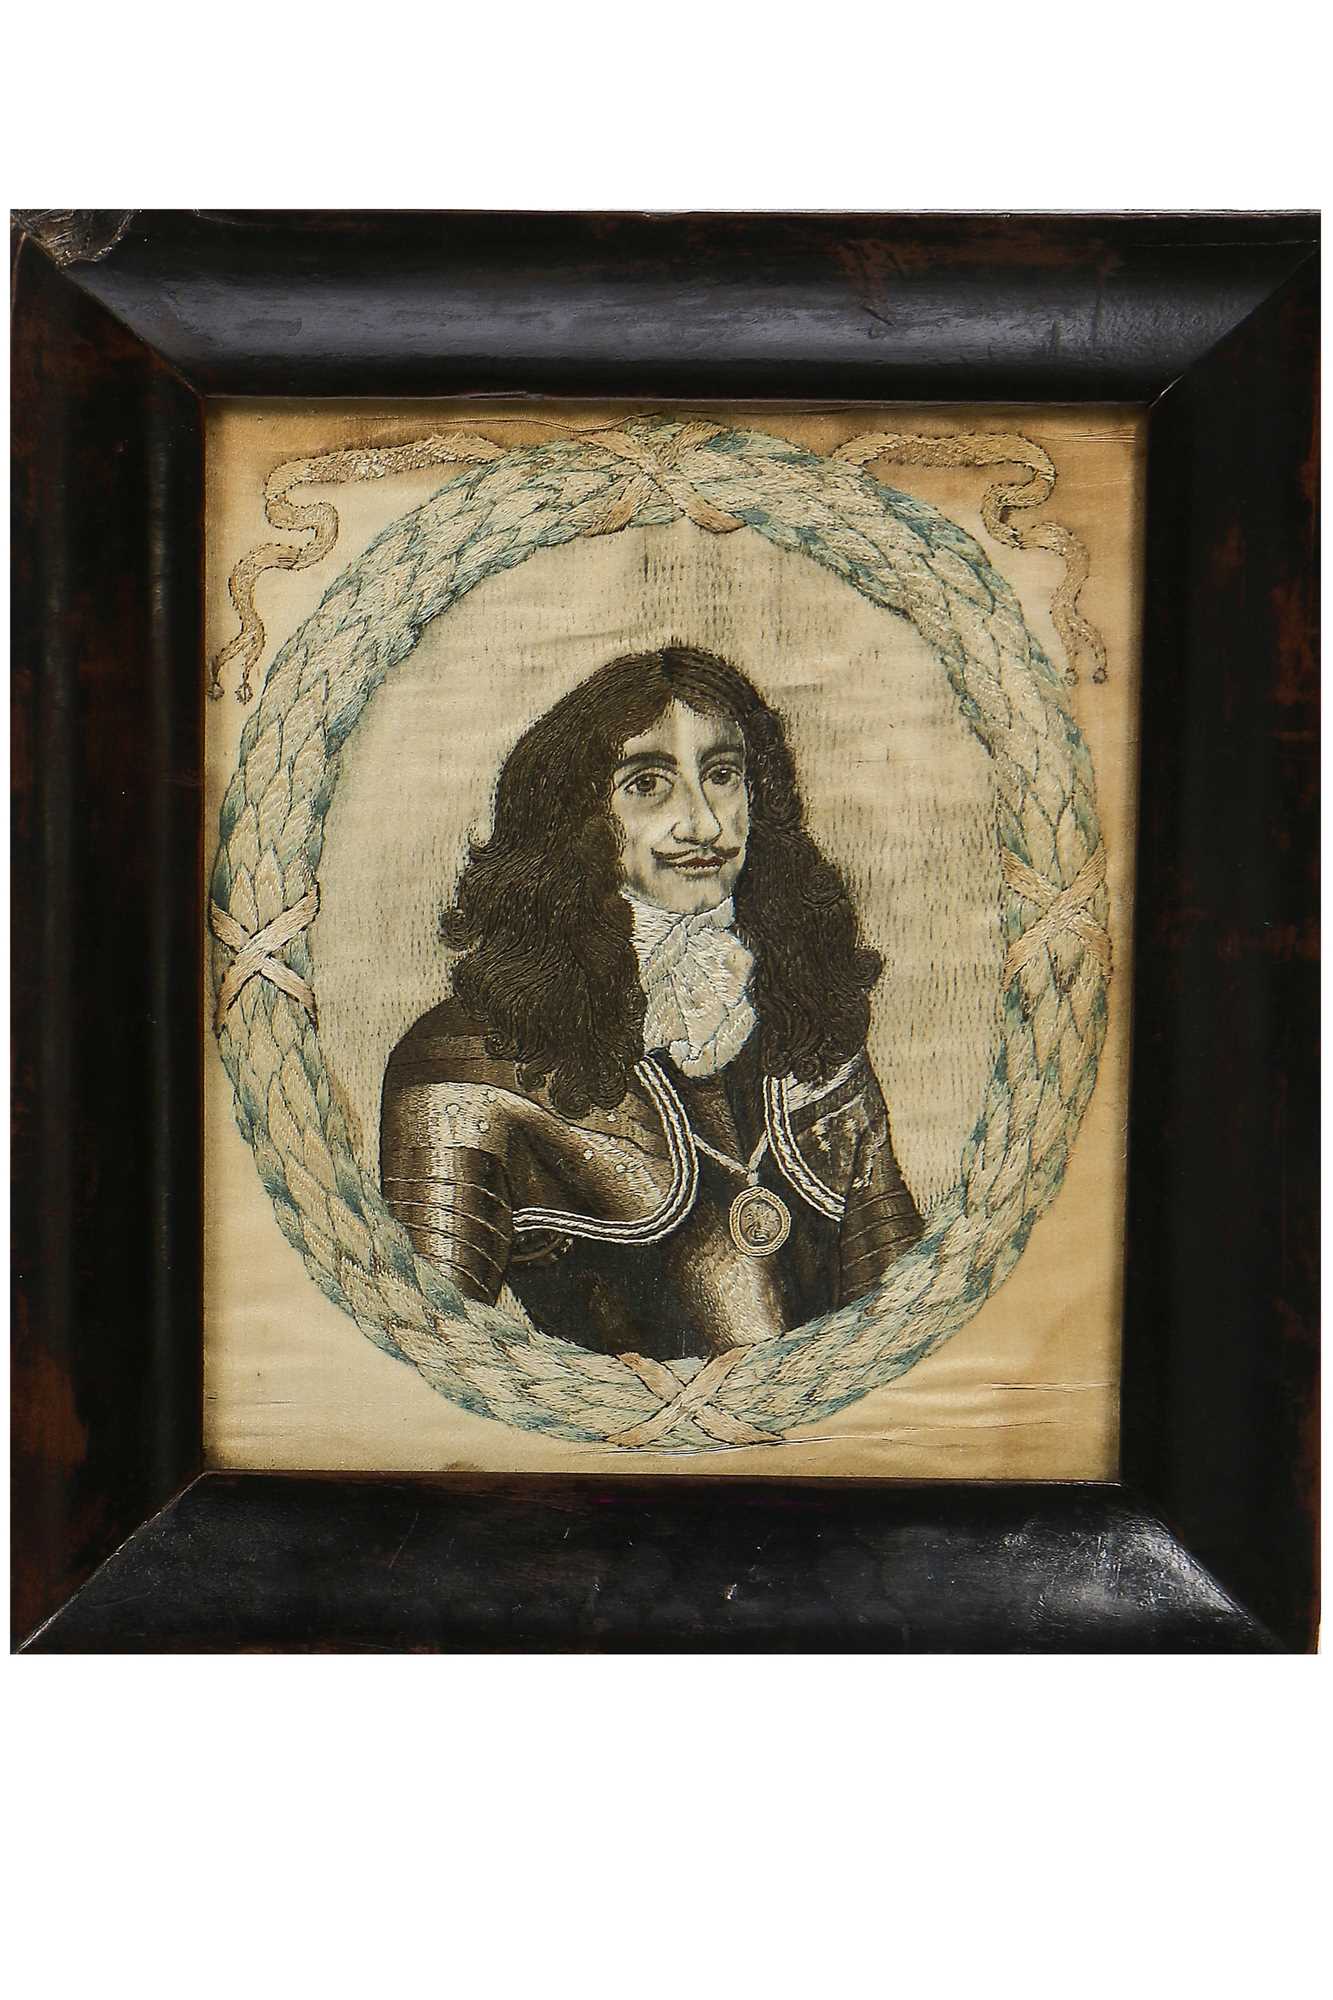 Lot 29 - A fine embroidered needle portrait of King Charles II, circa 1660